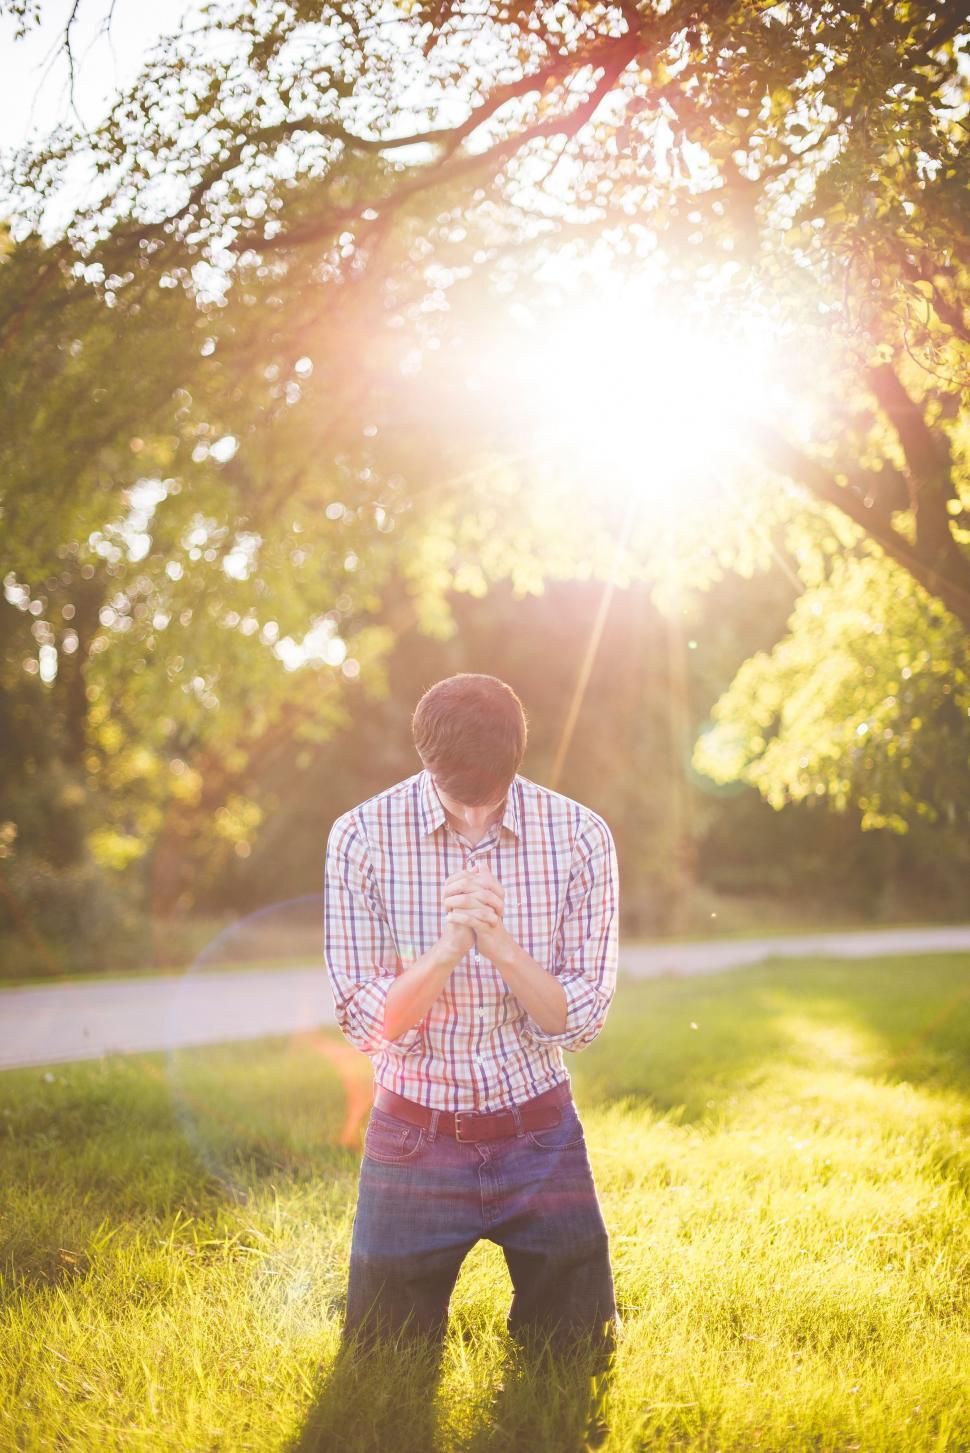 Free Image of Man Standing in Field With Hands Together 